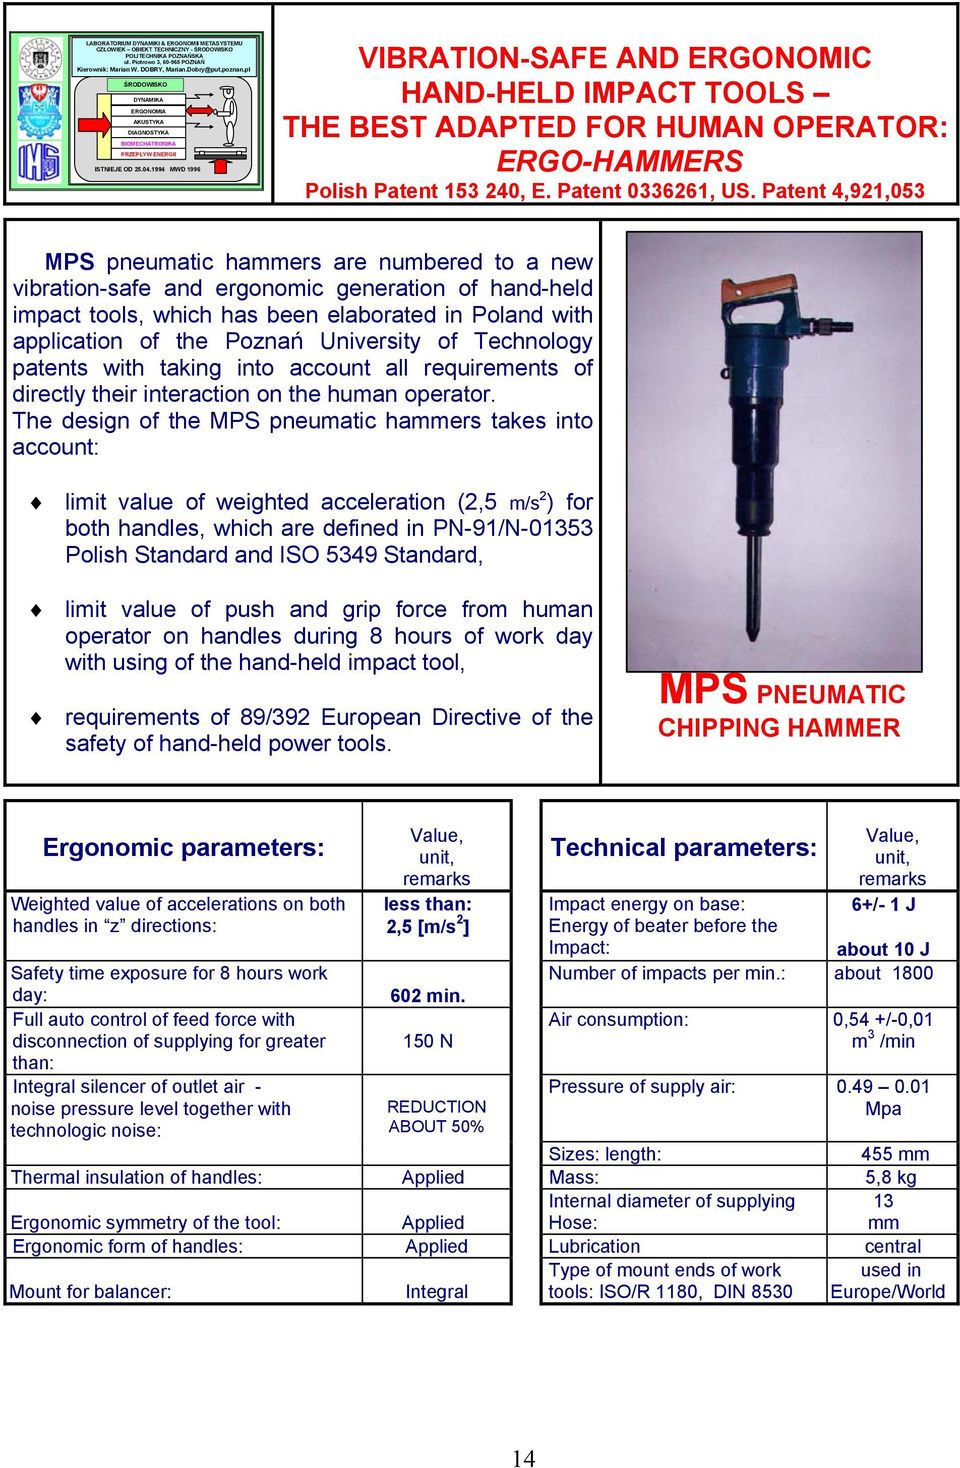 1994 MWD 1996 VIBRATION-SAFE AND ERGONOMIC HAND-HELD IMPACT TOOLS THE BEST ADAPTED FOR HUMAN OPERATOR: ERGO-HAMMERS Polish Patent 153 240, E. Patent 0336261, US.